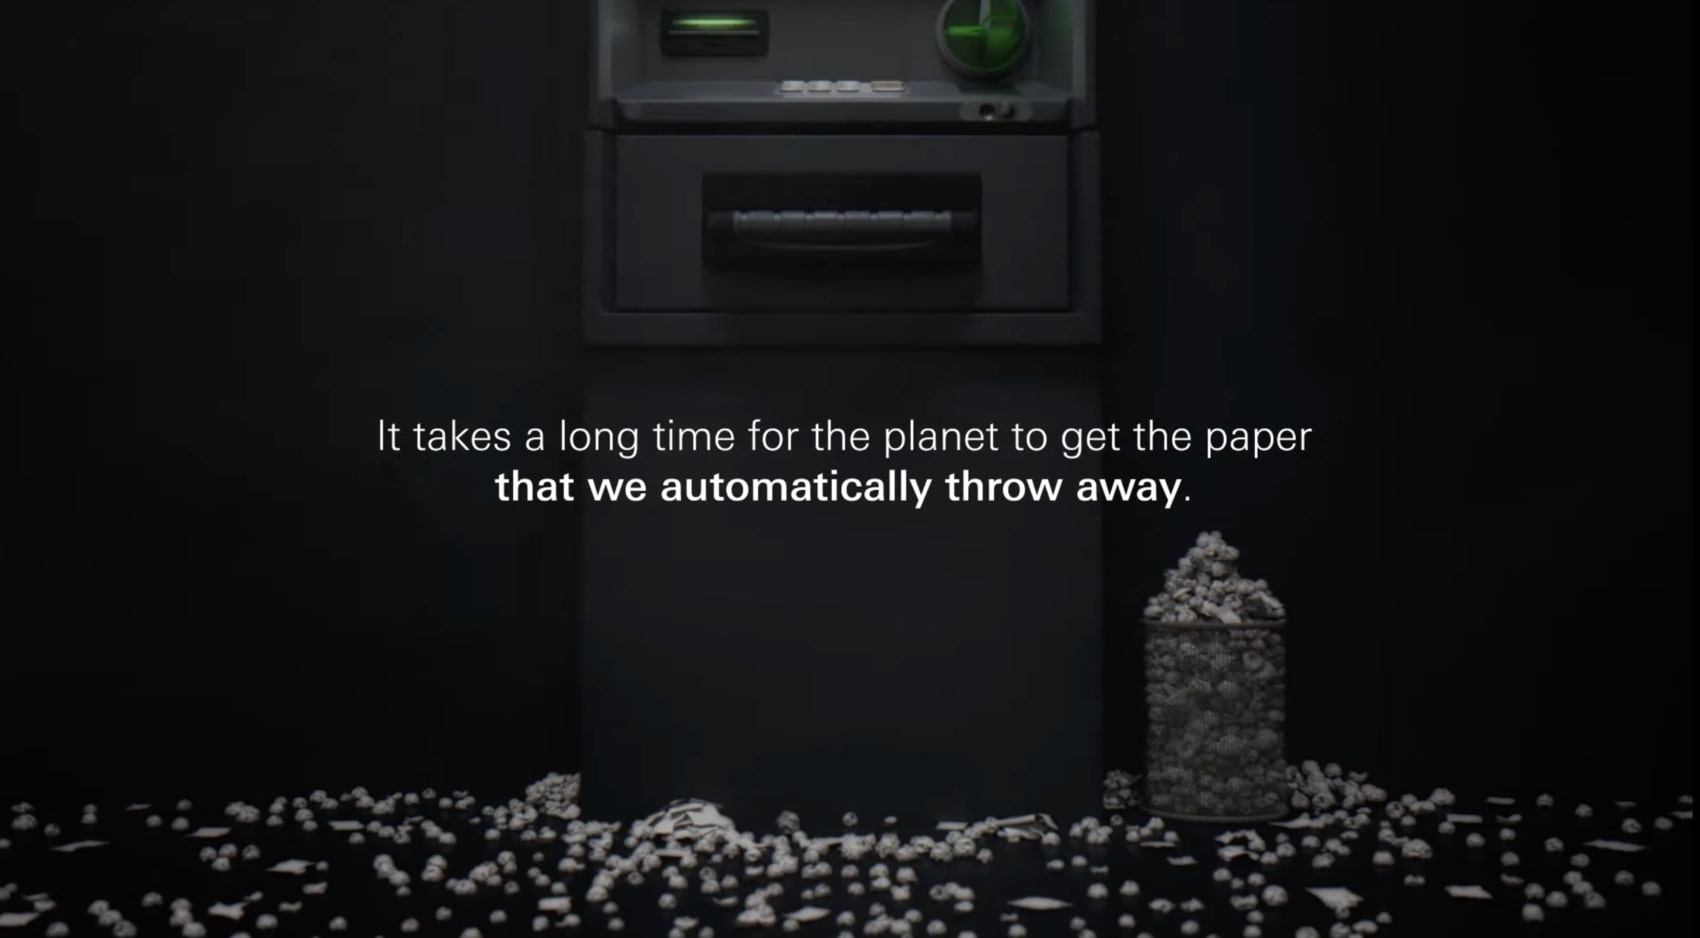 Let's make the planet not pay the cost, An awareness campaign, HSBC